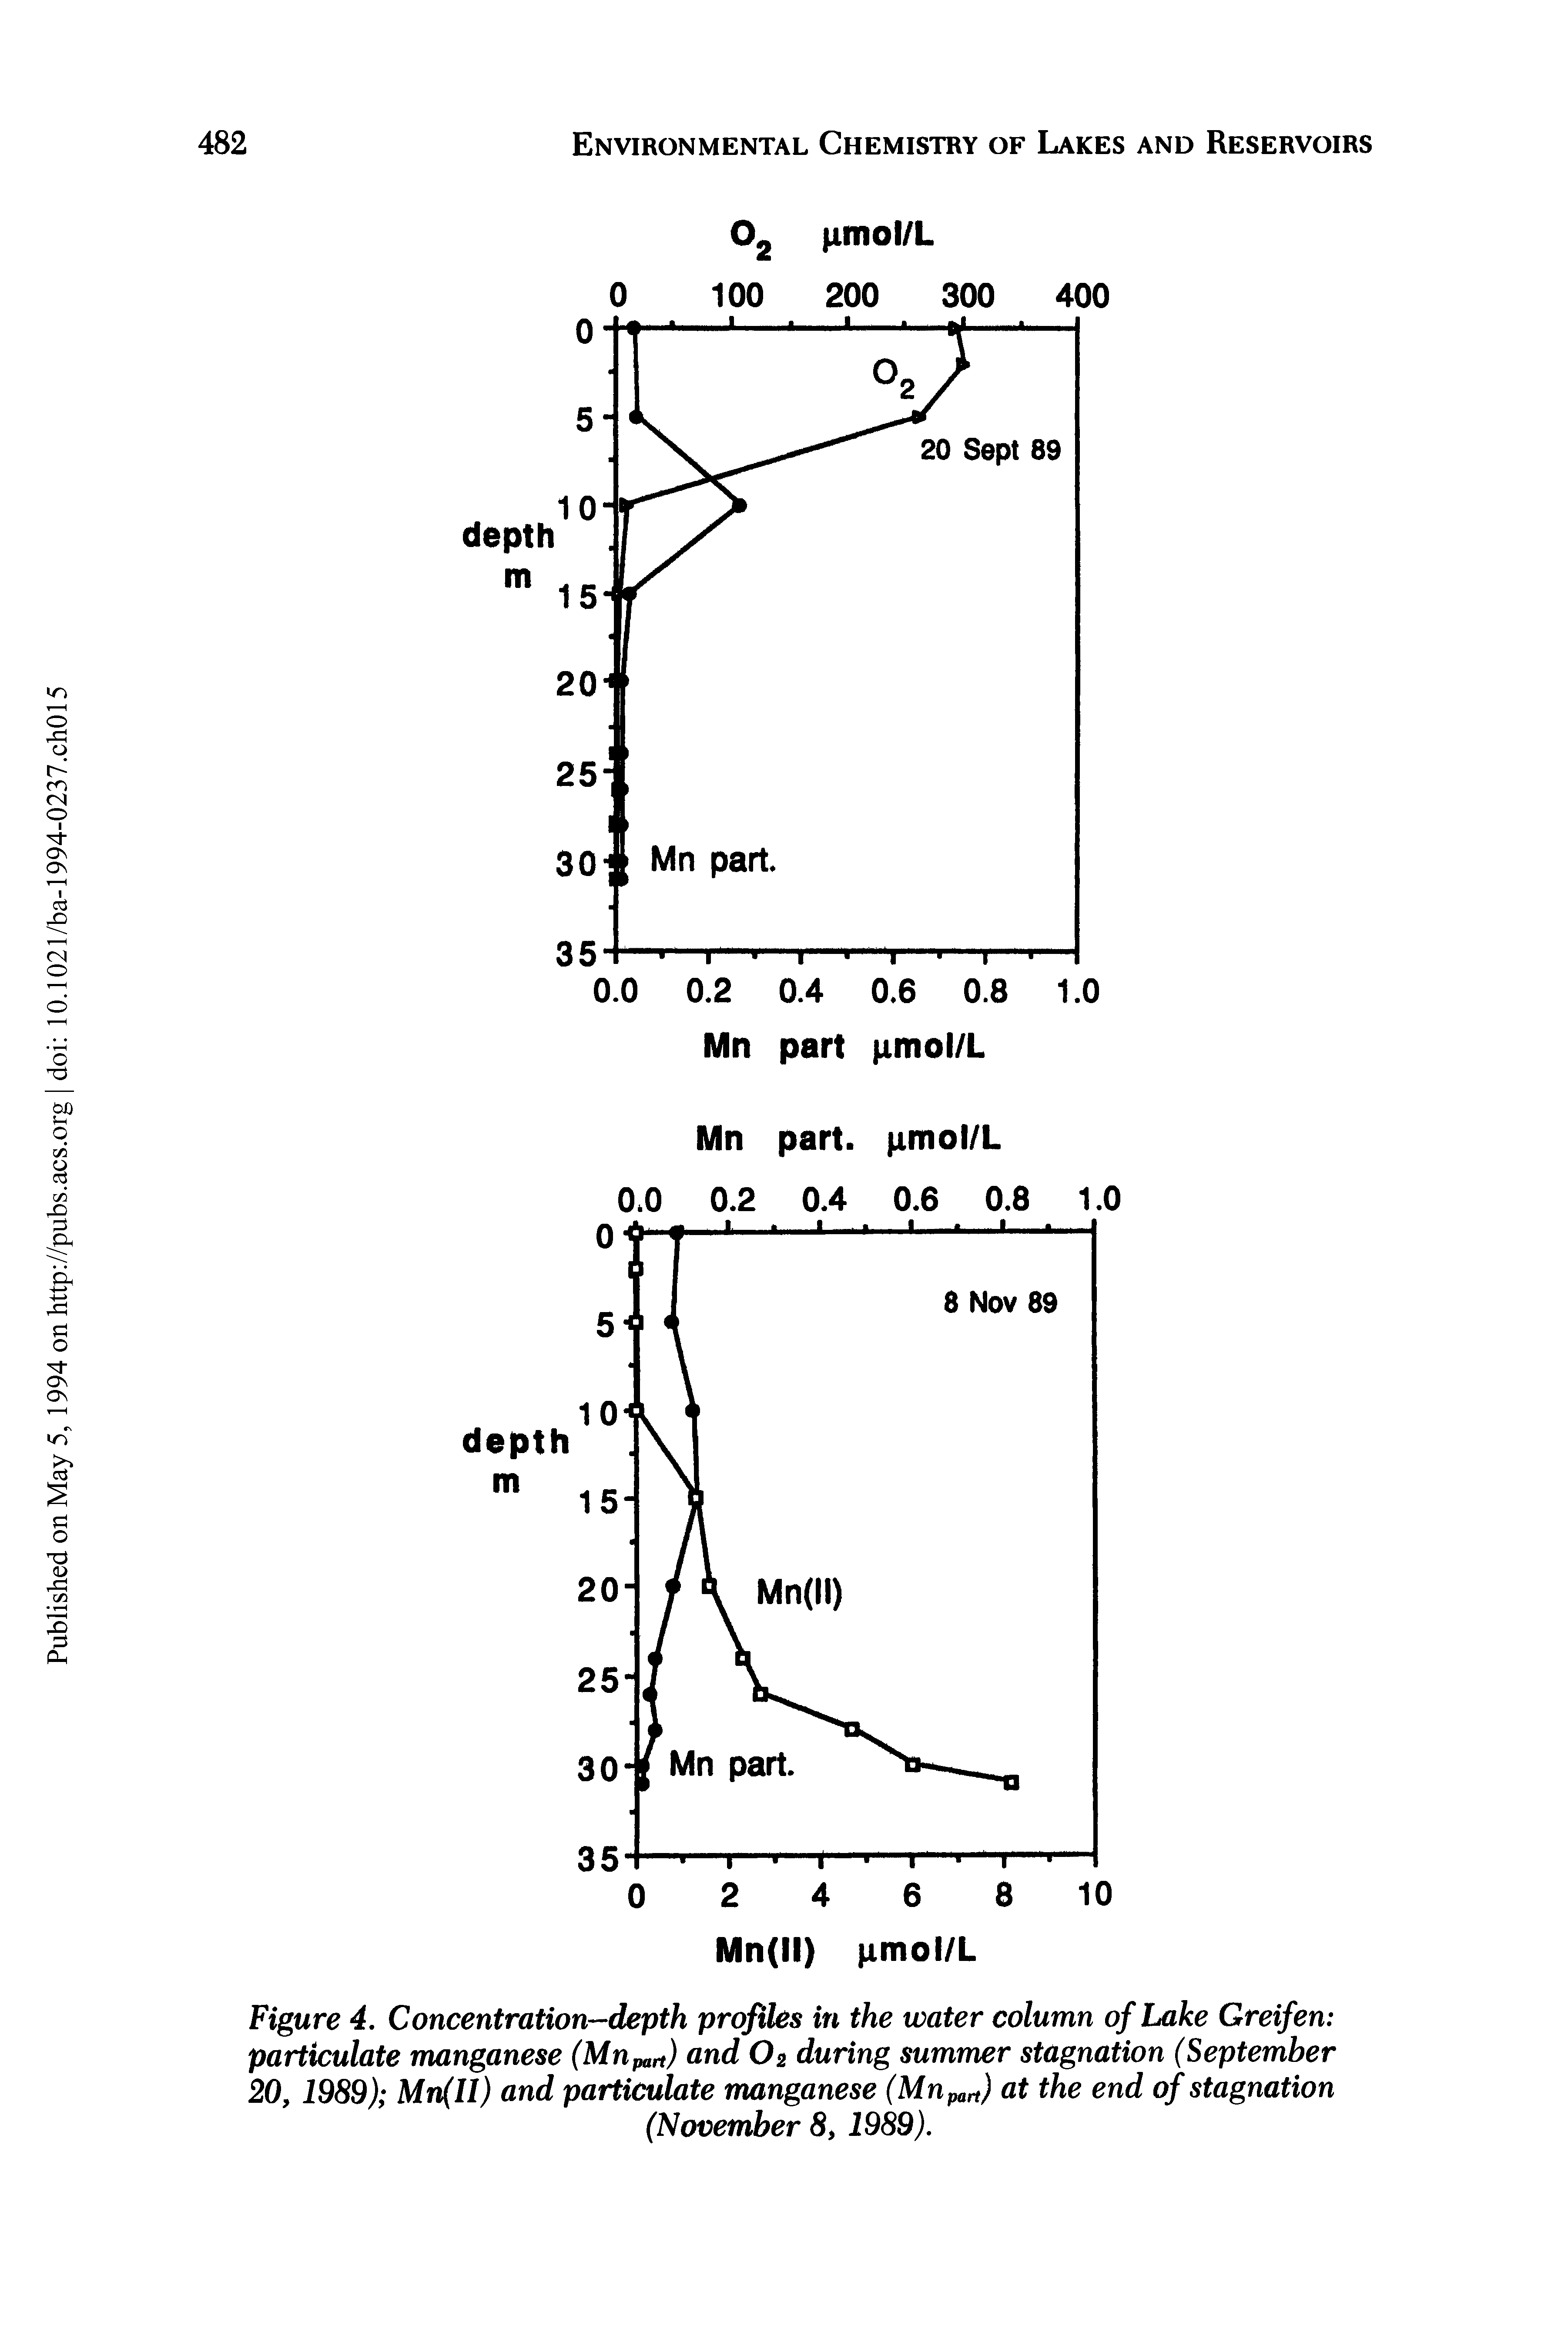 Figure 4. Concentration—depth profiles in the water column of Lake Greifen particulate manganese (Mnpan) and Oj during summer stagnation (September 20,1989) Mn(Il) and particulate manganese (Mn pan) at the end of stagnation...